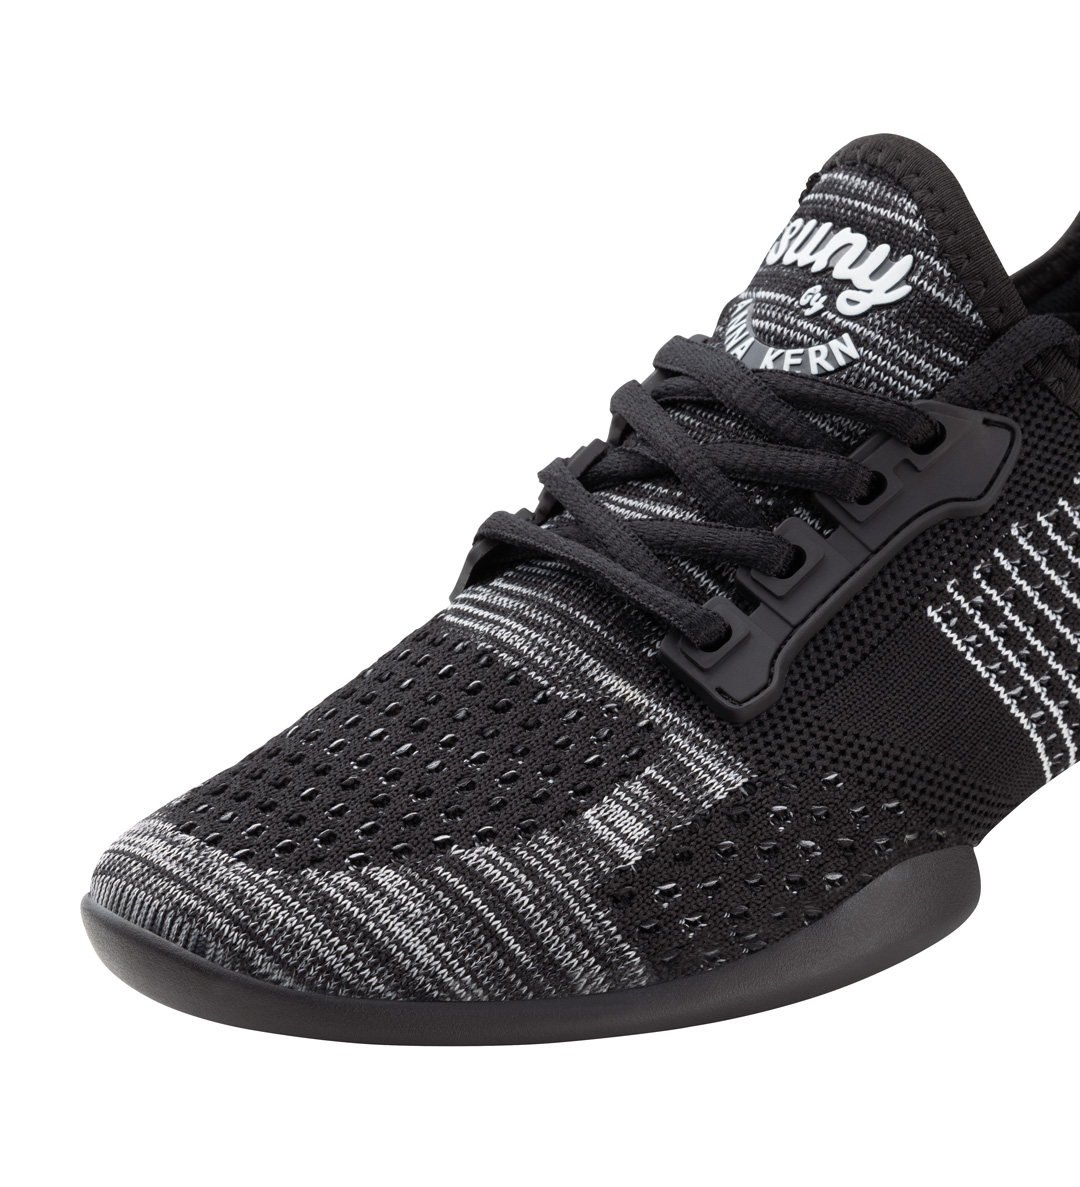 Detailed view of the Salsa Men's Dance Sneaker by Suny